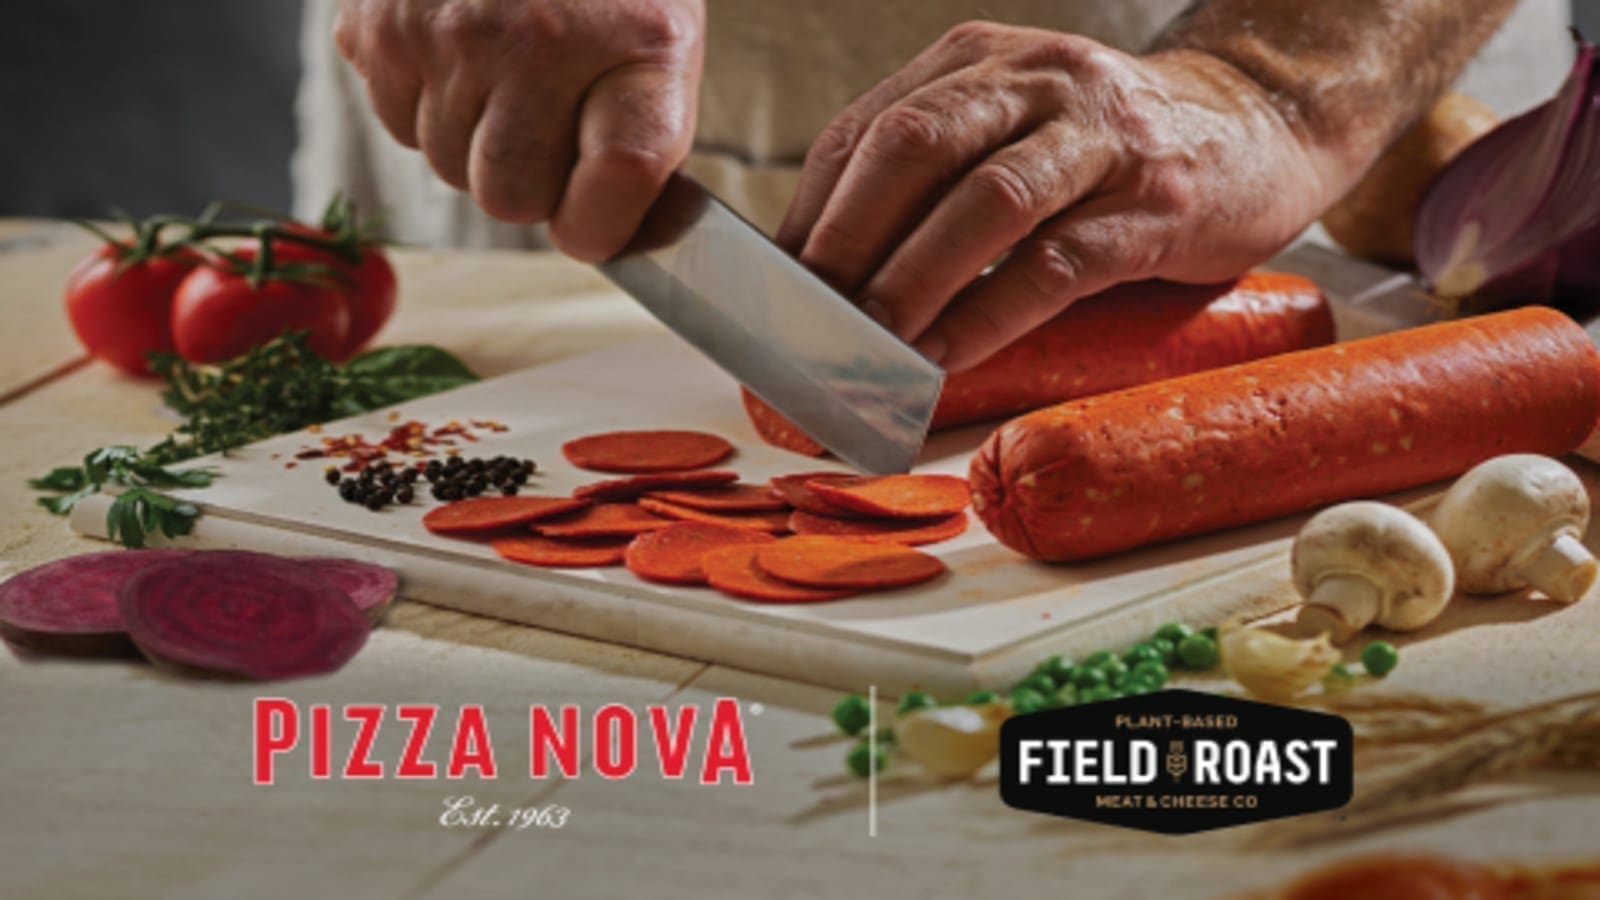 Canadian based fast food chain Pizza Nova debuts first-of-its-kind Plant-Based Pepperoni